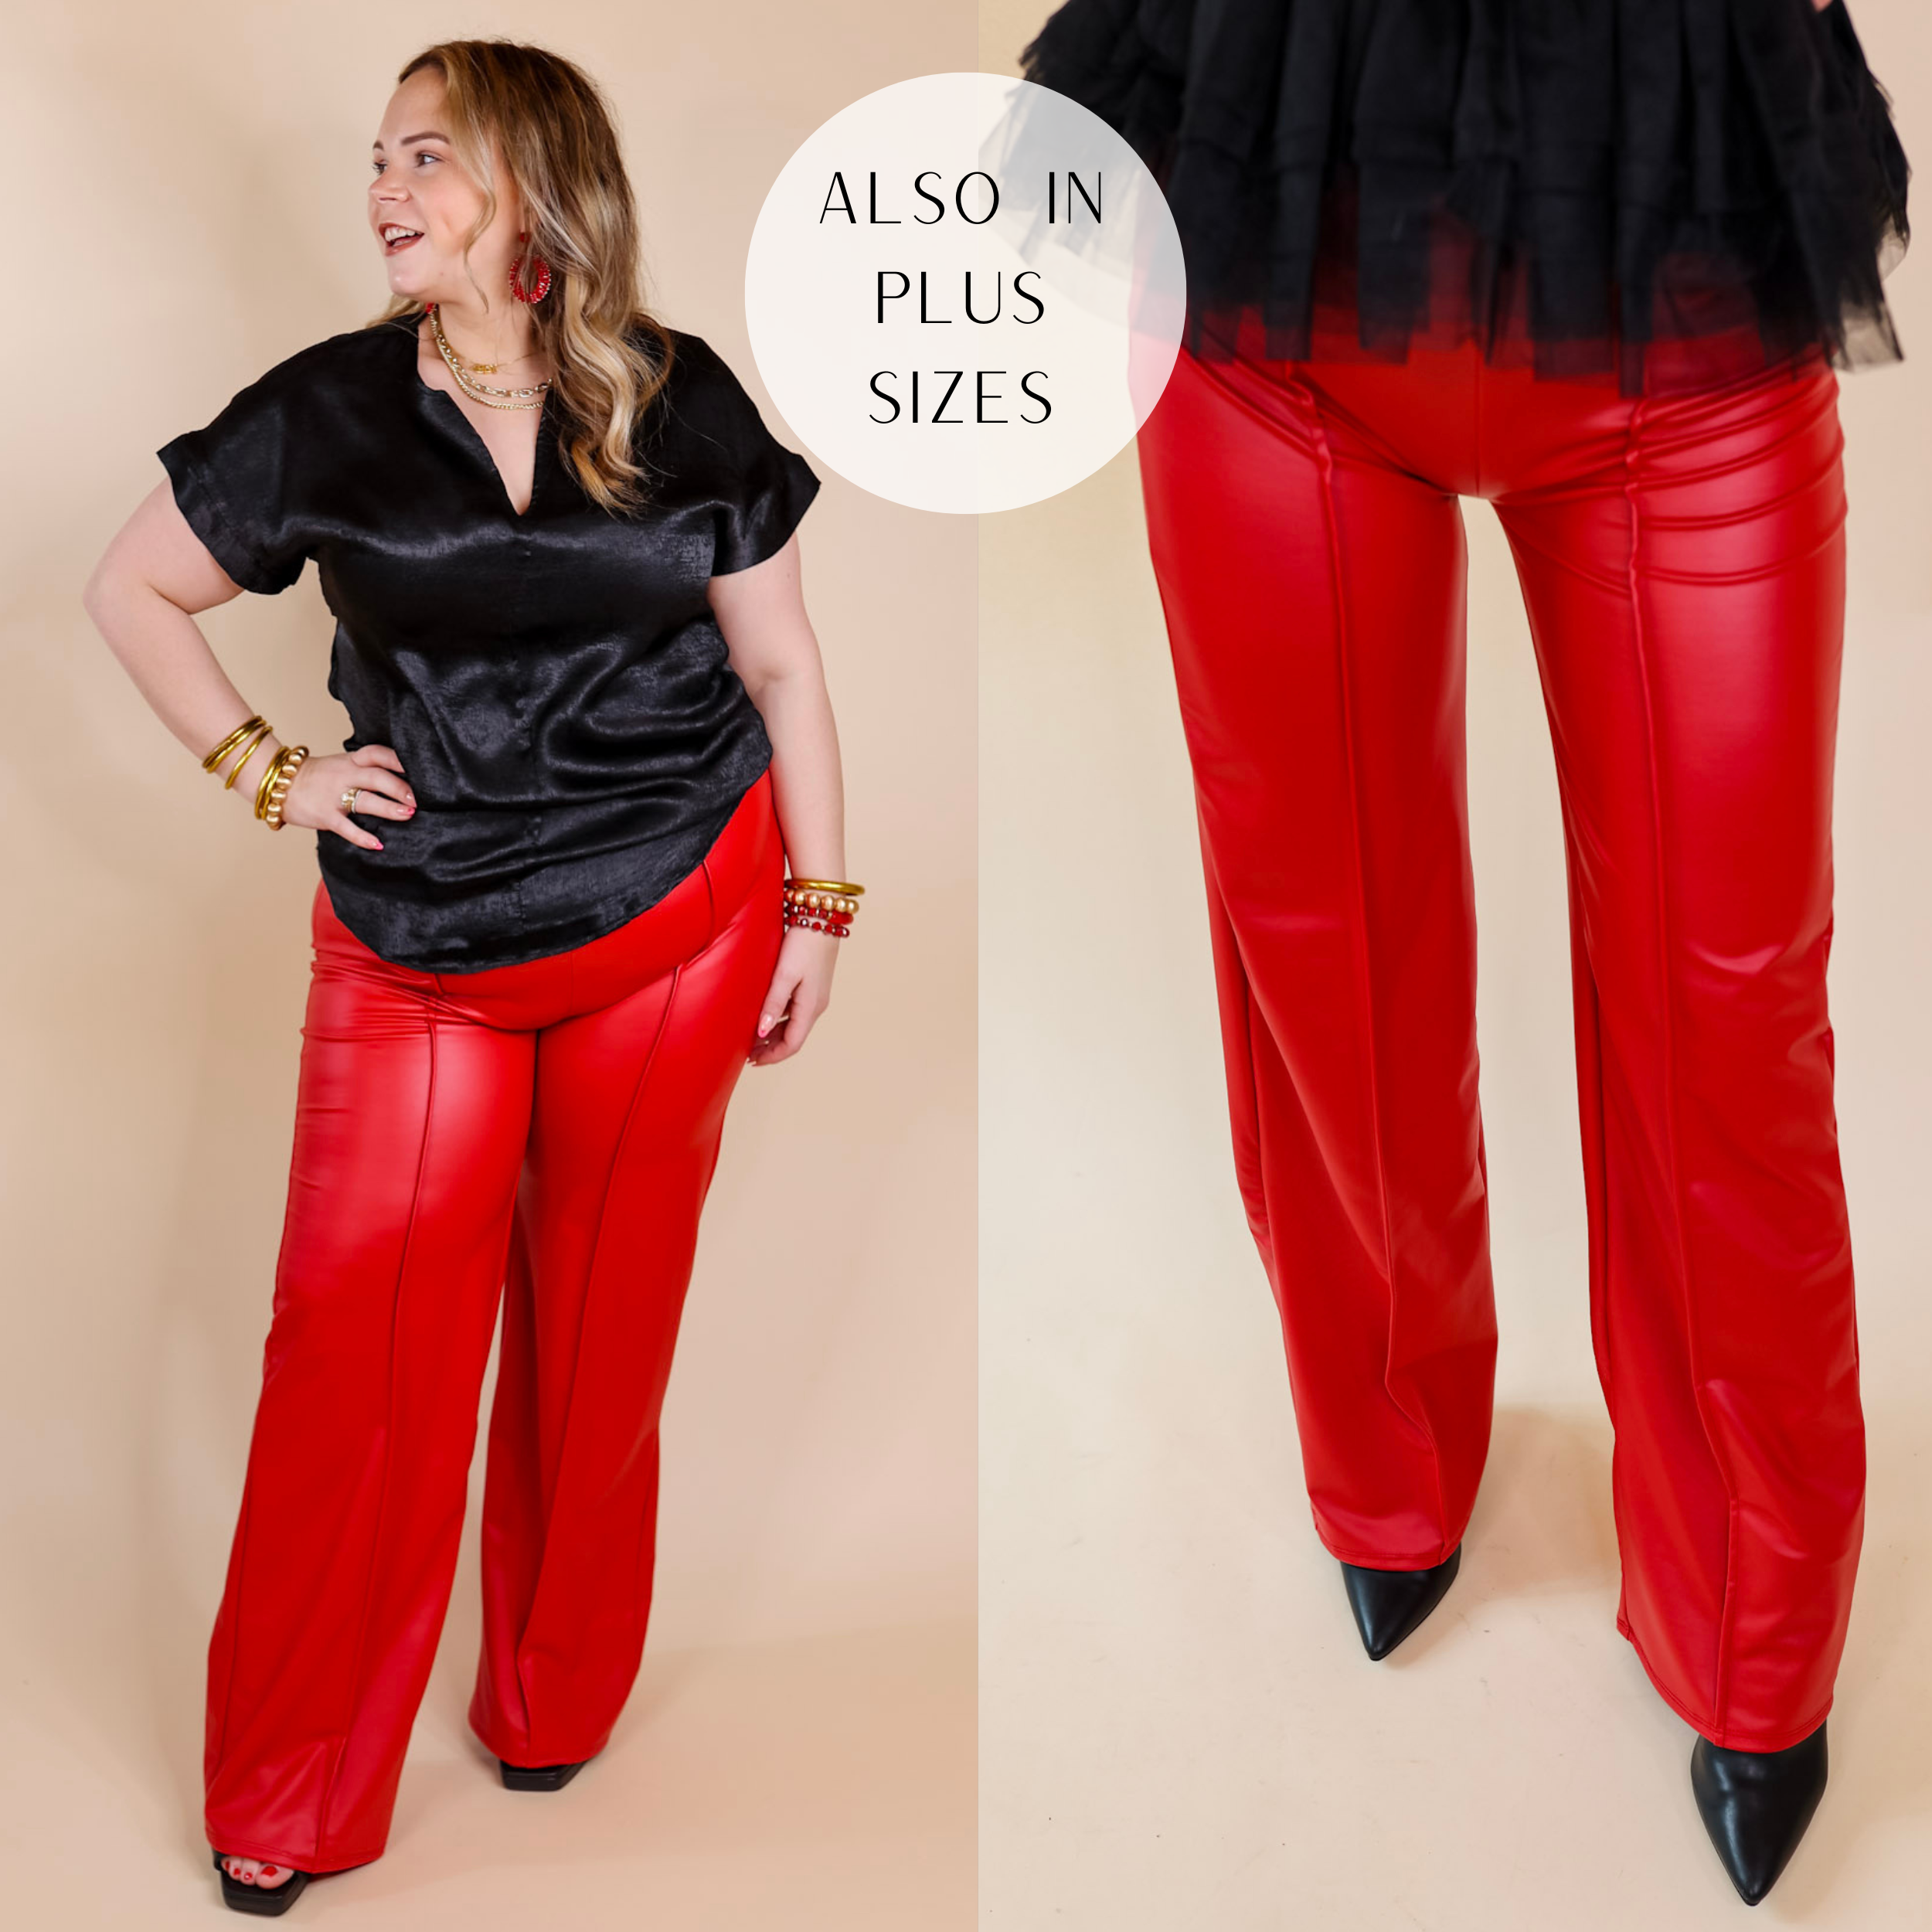 Models are wearing a pair of red faux leather pants with a front seem and wide leg.  Size large model has it paired with a black satin top and black heels. Size small model (pictured from the waist down) has it paired with a black tulle top and black booties.